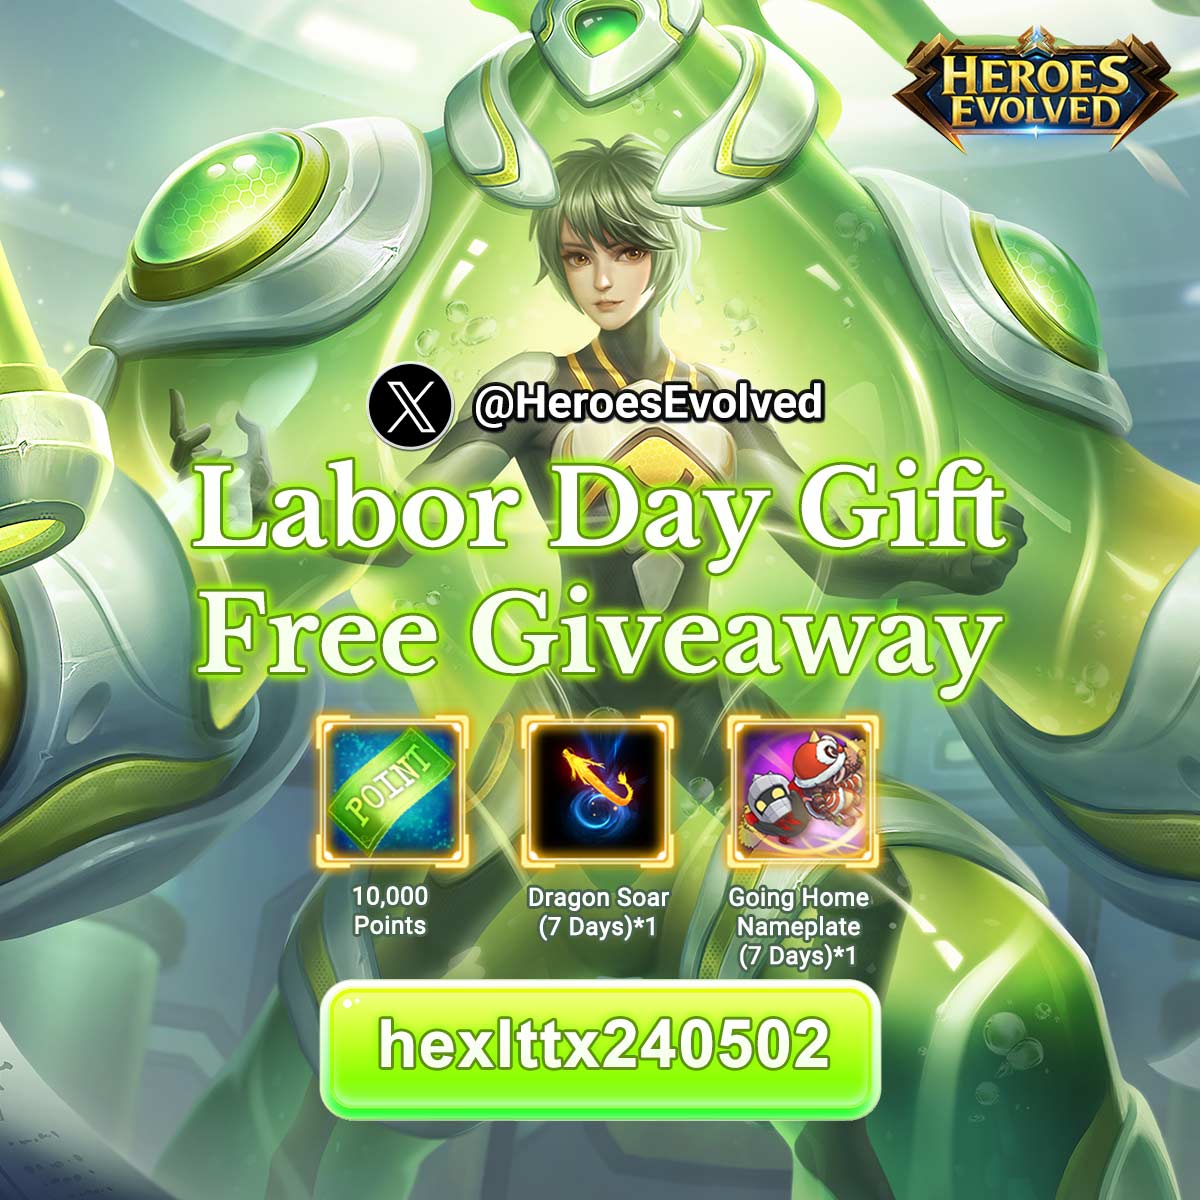 Claim your free Labor Day gift! 
#HeroesEvolved #FreeGift #Thursday #LaborDay